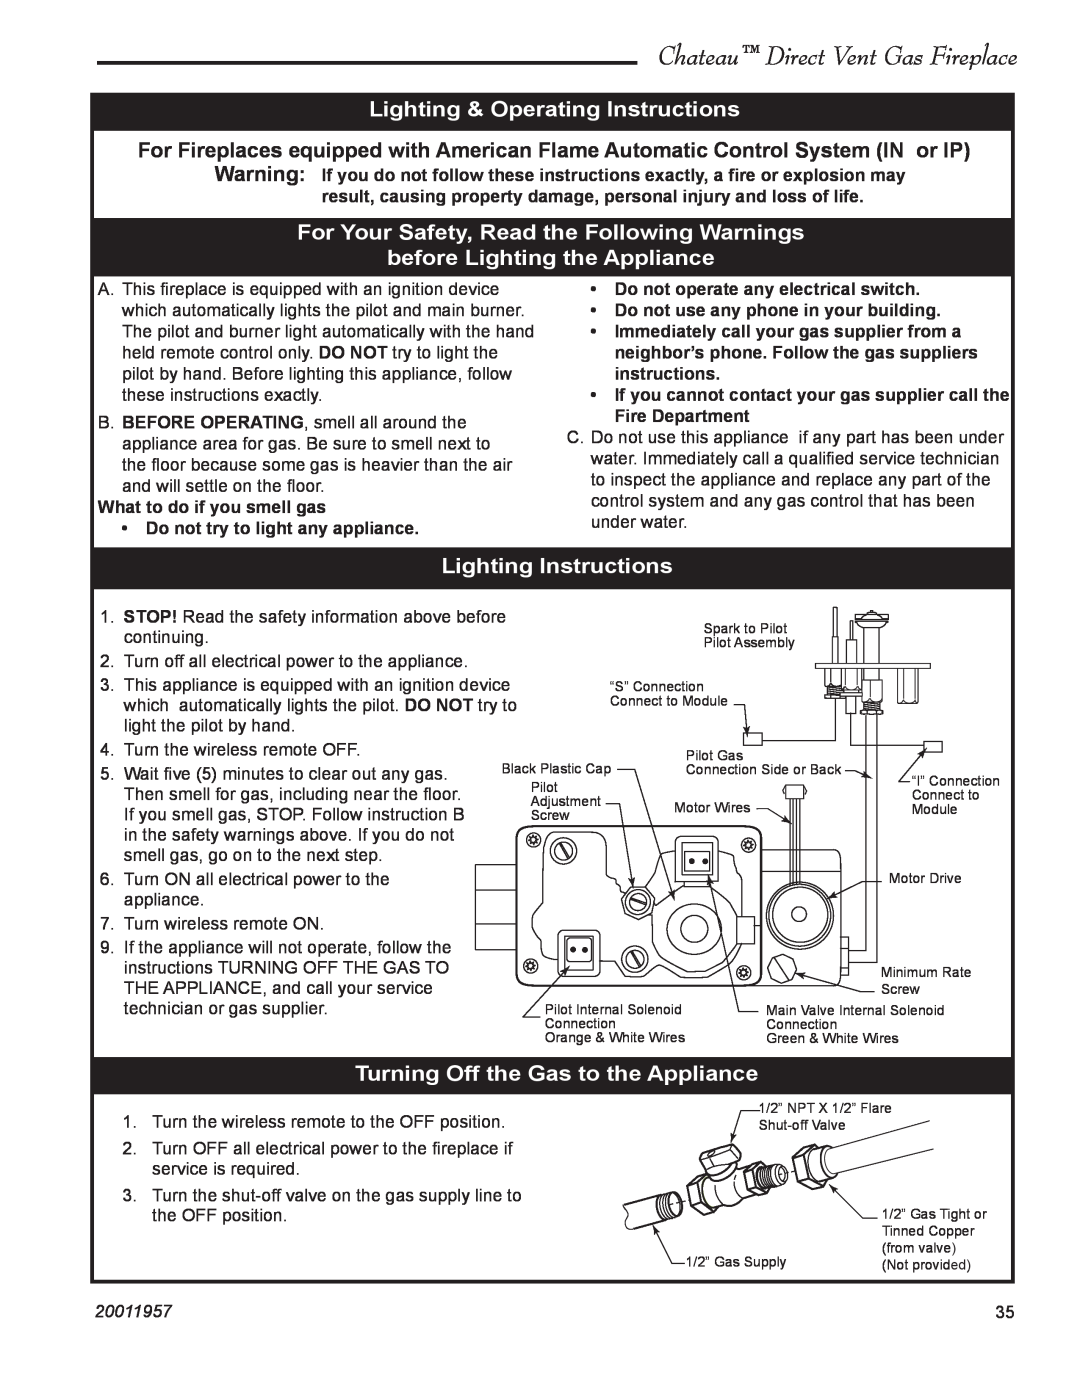 Vermont Casting DTV38s2 Lighting & Operating Instructions, For Your Safety, Read the Following Warnings, 20011957 